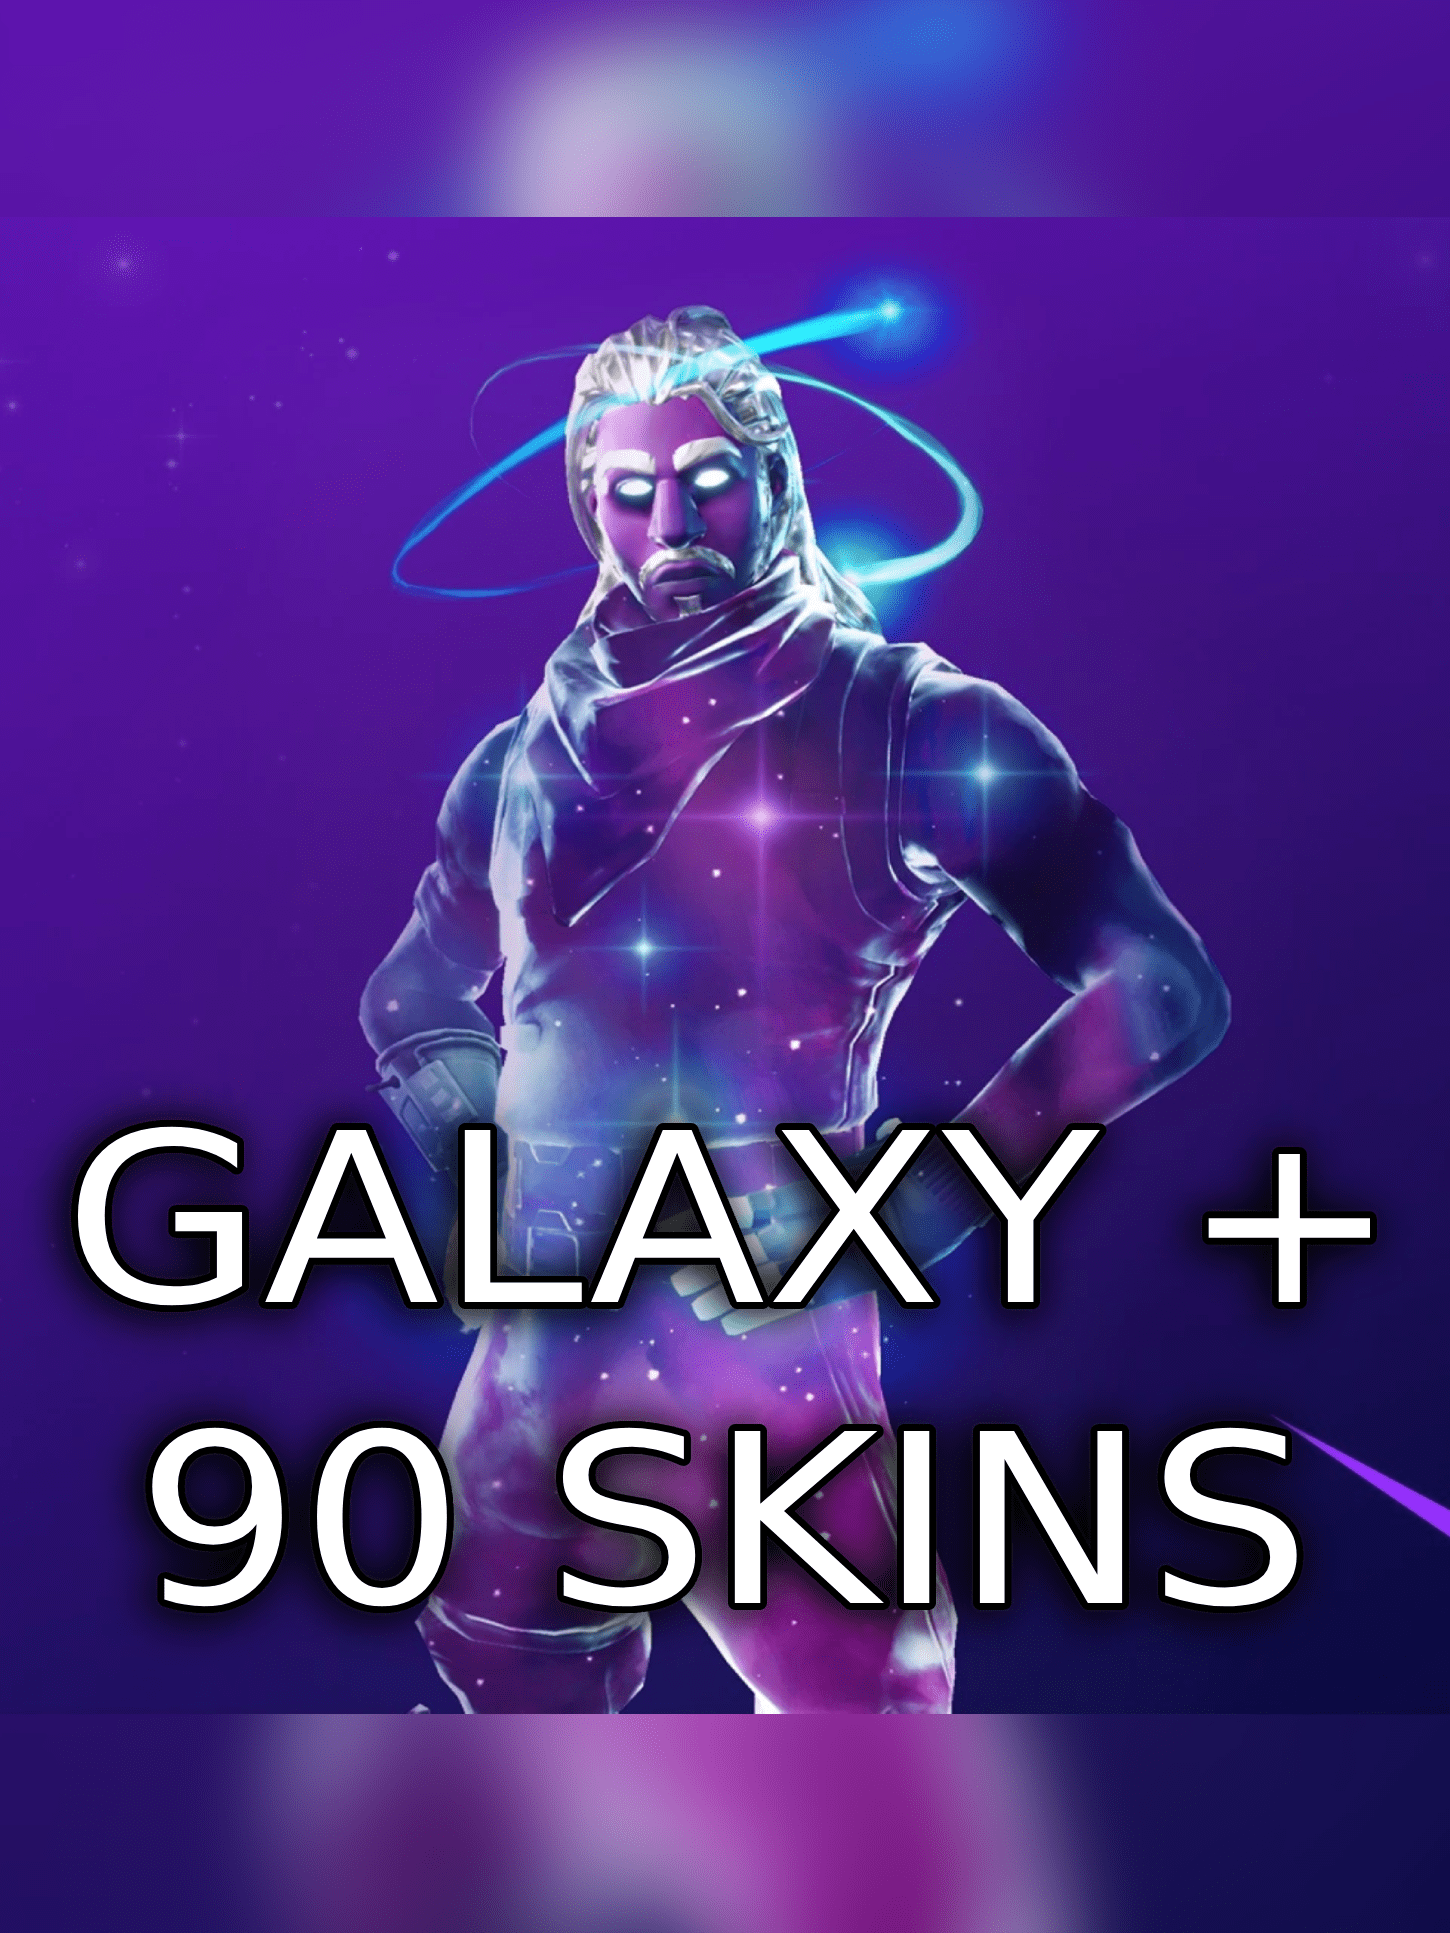 GALAXY + OG STW DELUXE EDITION + 90 SKINS [FULL MAIL ACCESS]